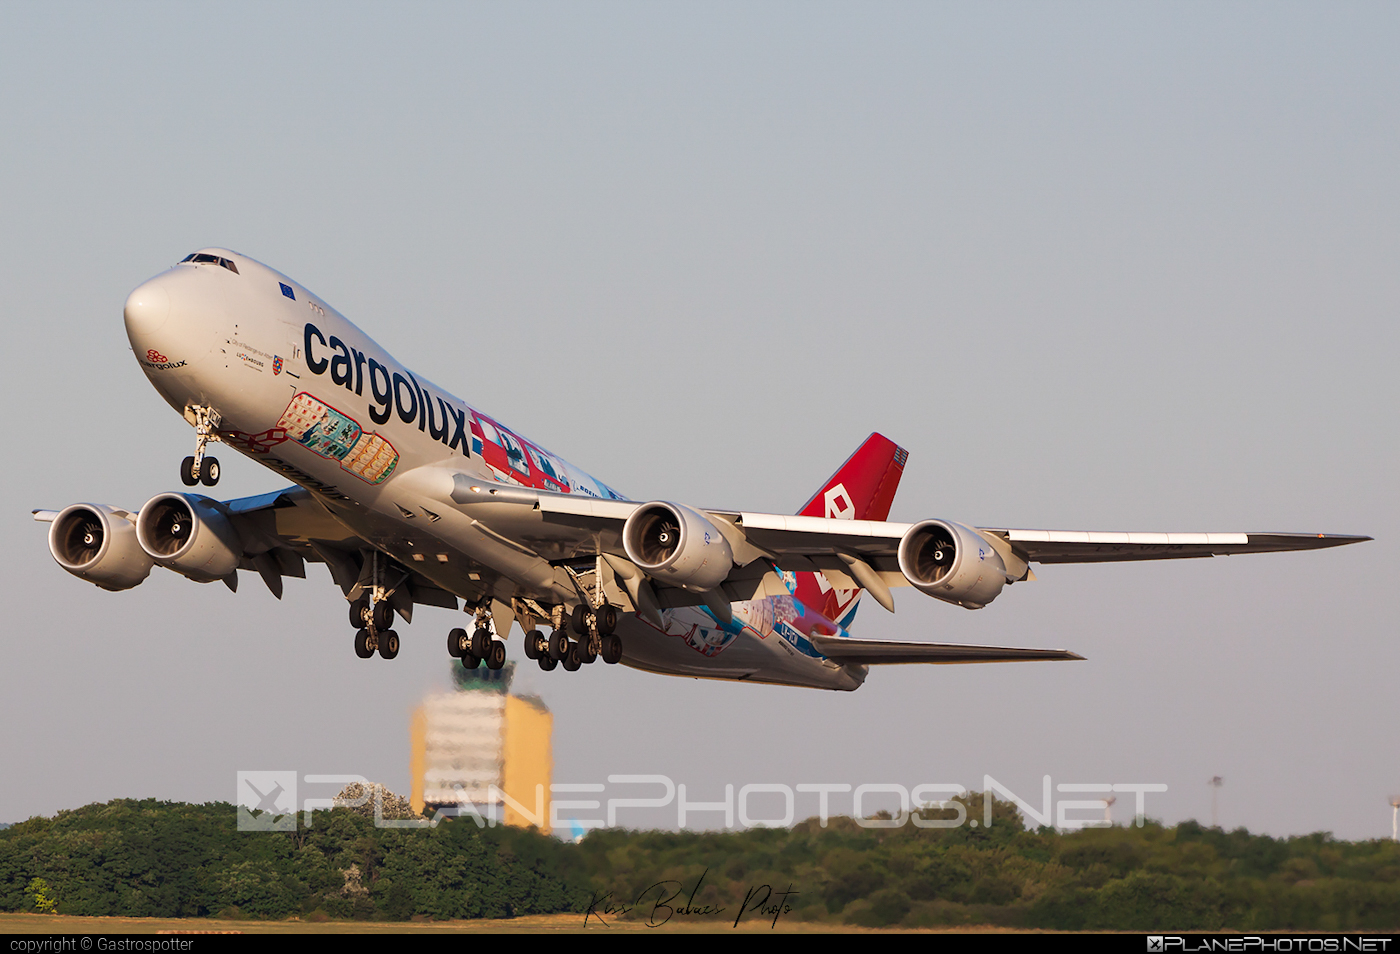 Boeing 747-8F - LX-VCM operated by Cargolux Airlines International #b747 #b747f #b747freighter #boeing #boeing747 #cargolux #jumbo